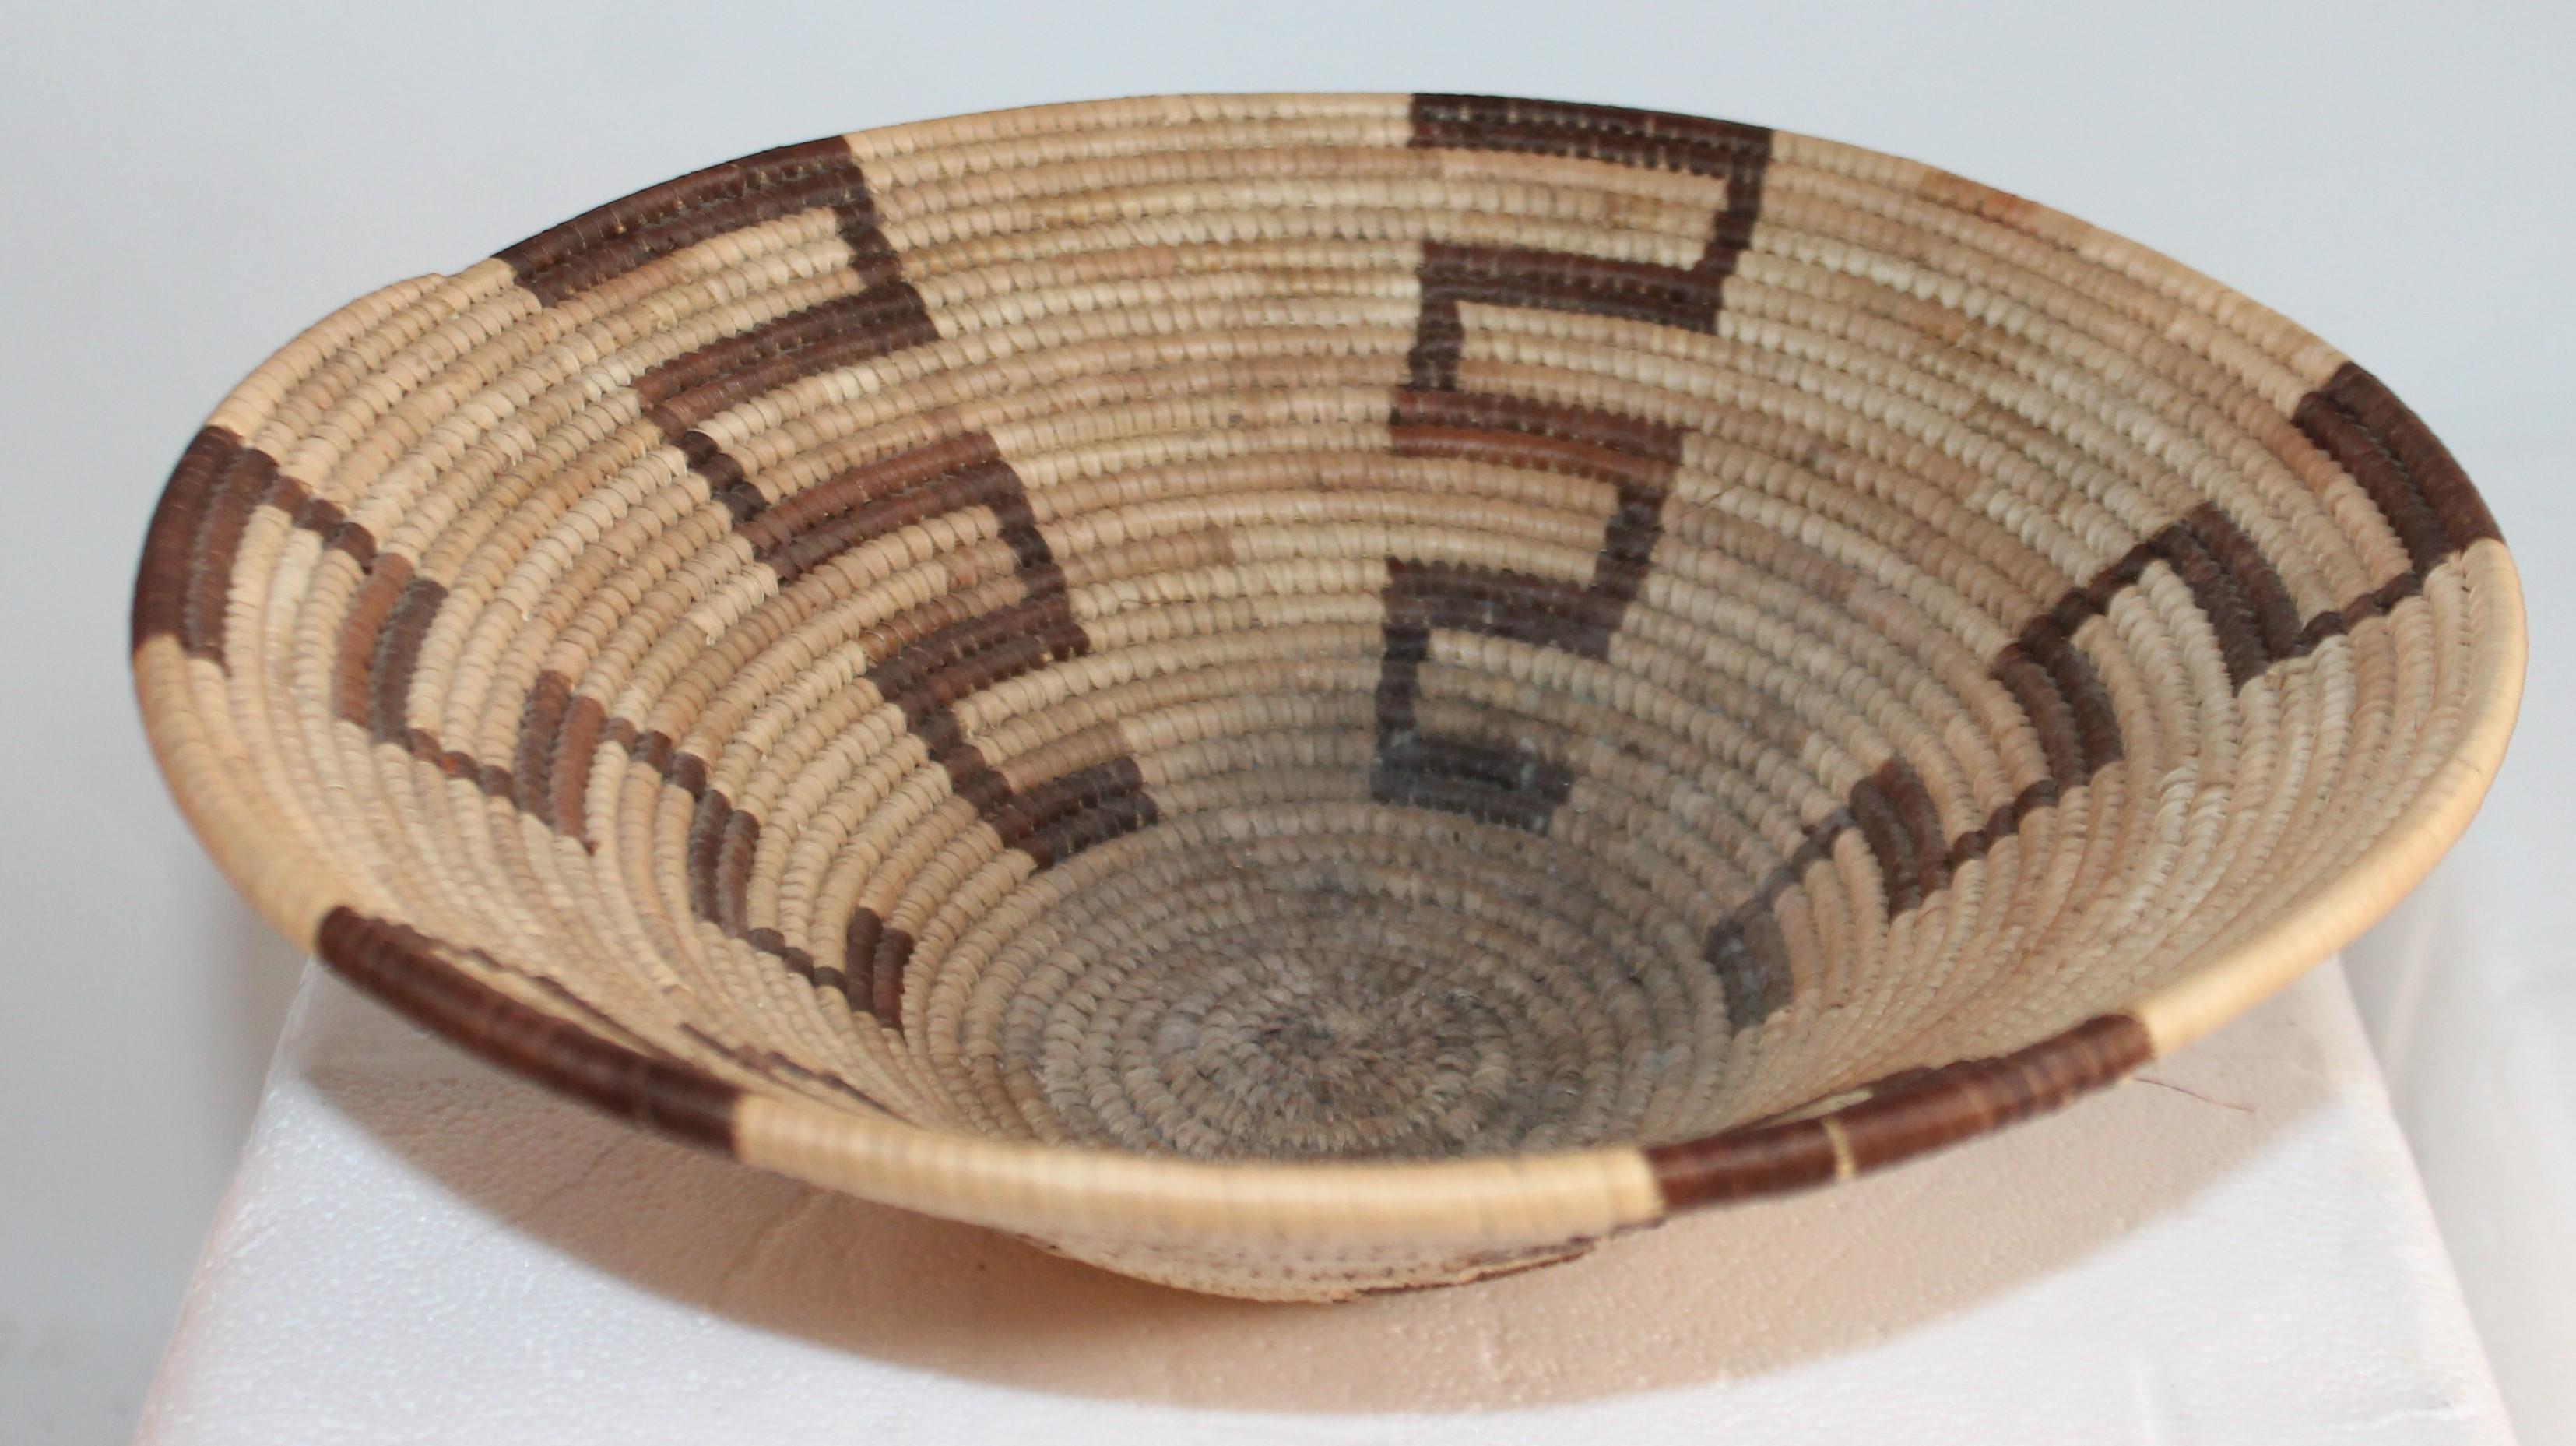 This most unusual shaped basket is in pristine condition and probably from the 1930s. Such a great cone shape.